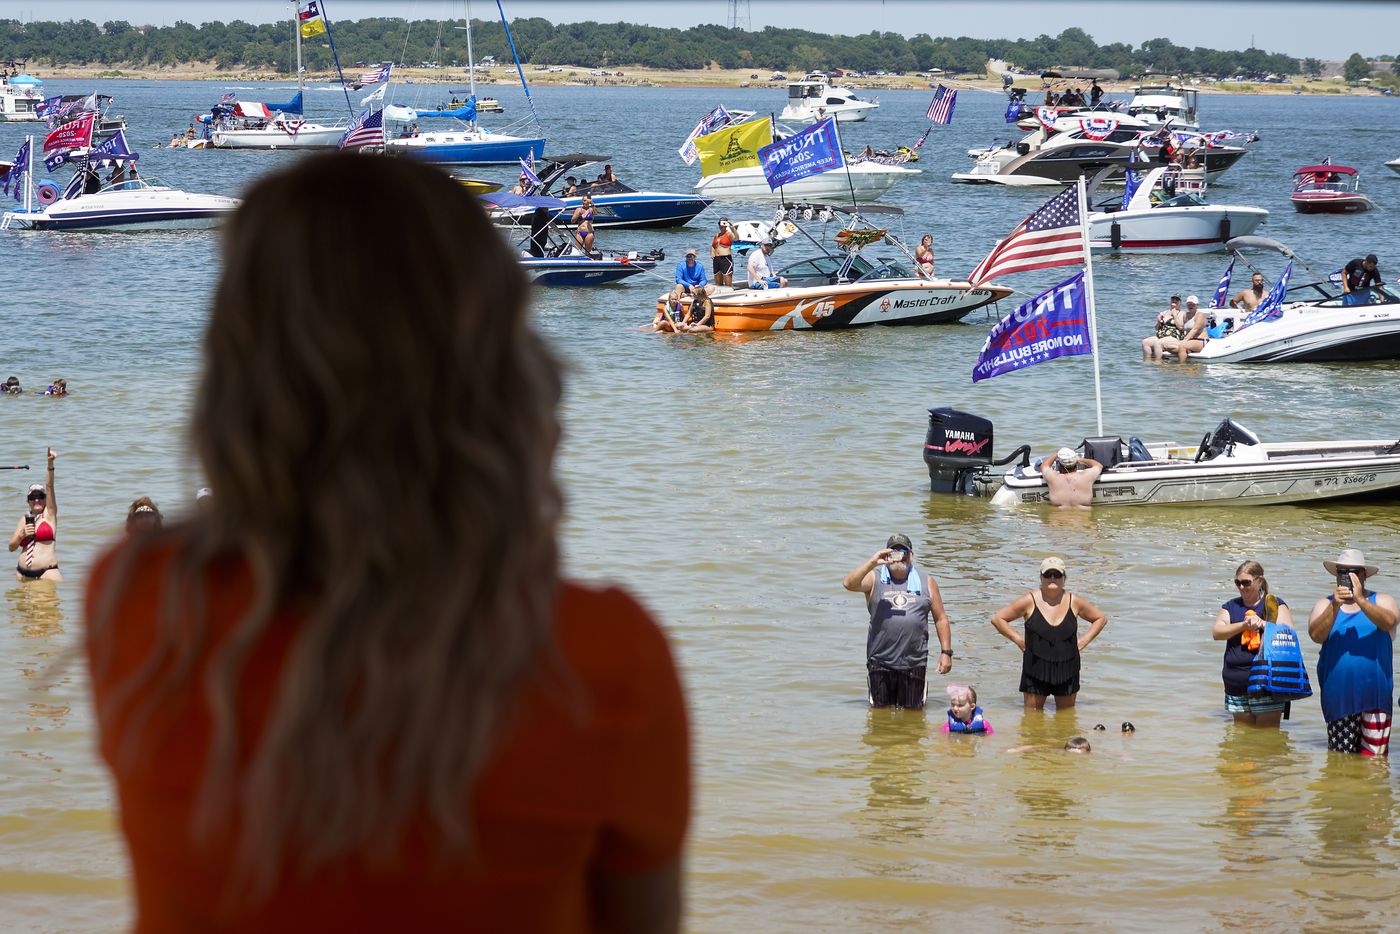 Shelley Luther, owner of Salon  la Mode,  addresses supporters of President Donald Trump during a campaign rally and boat parade at Oak Grove Park on Grapevine Lake on Saturday, Aug. 15, 2020.